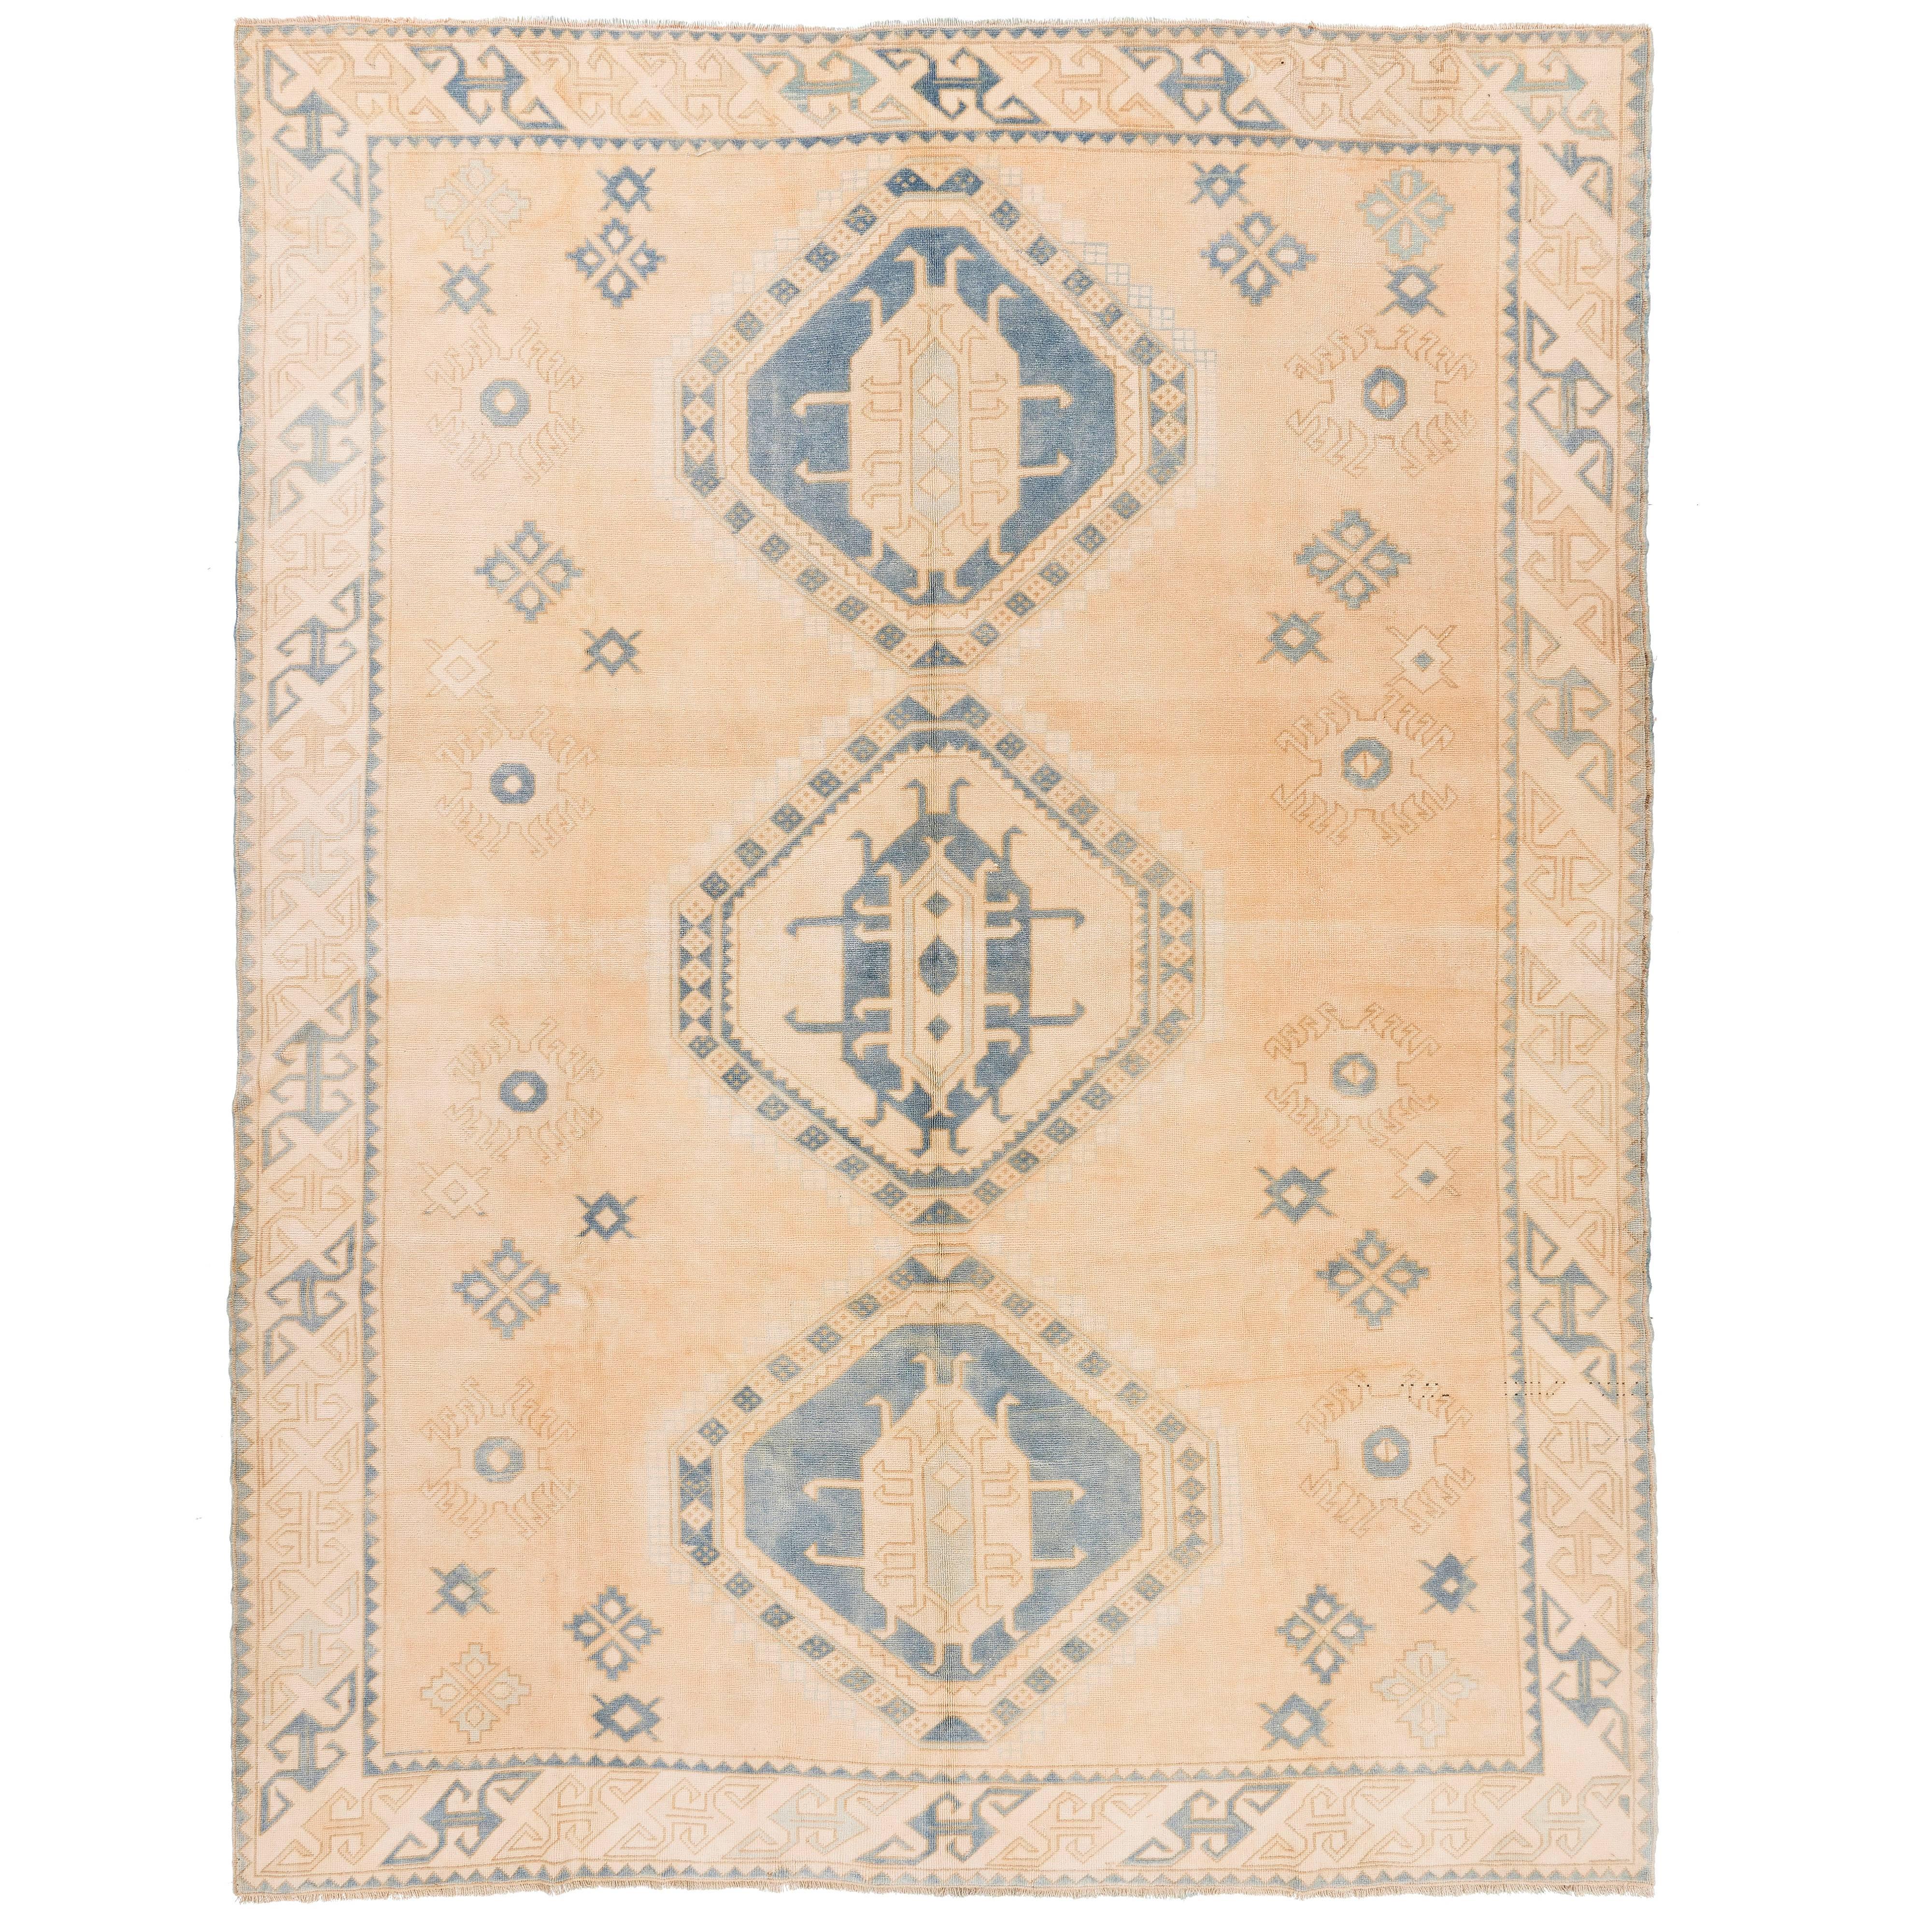 9.7x12.6 Ft Vintage Anatolian Rug in Salmon Pink, Cream and Light Blue Colors For Sale